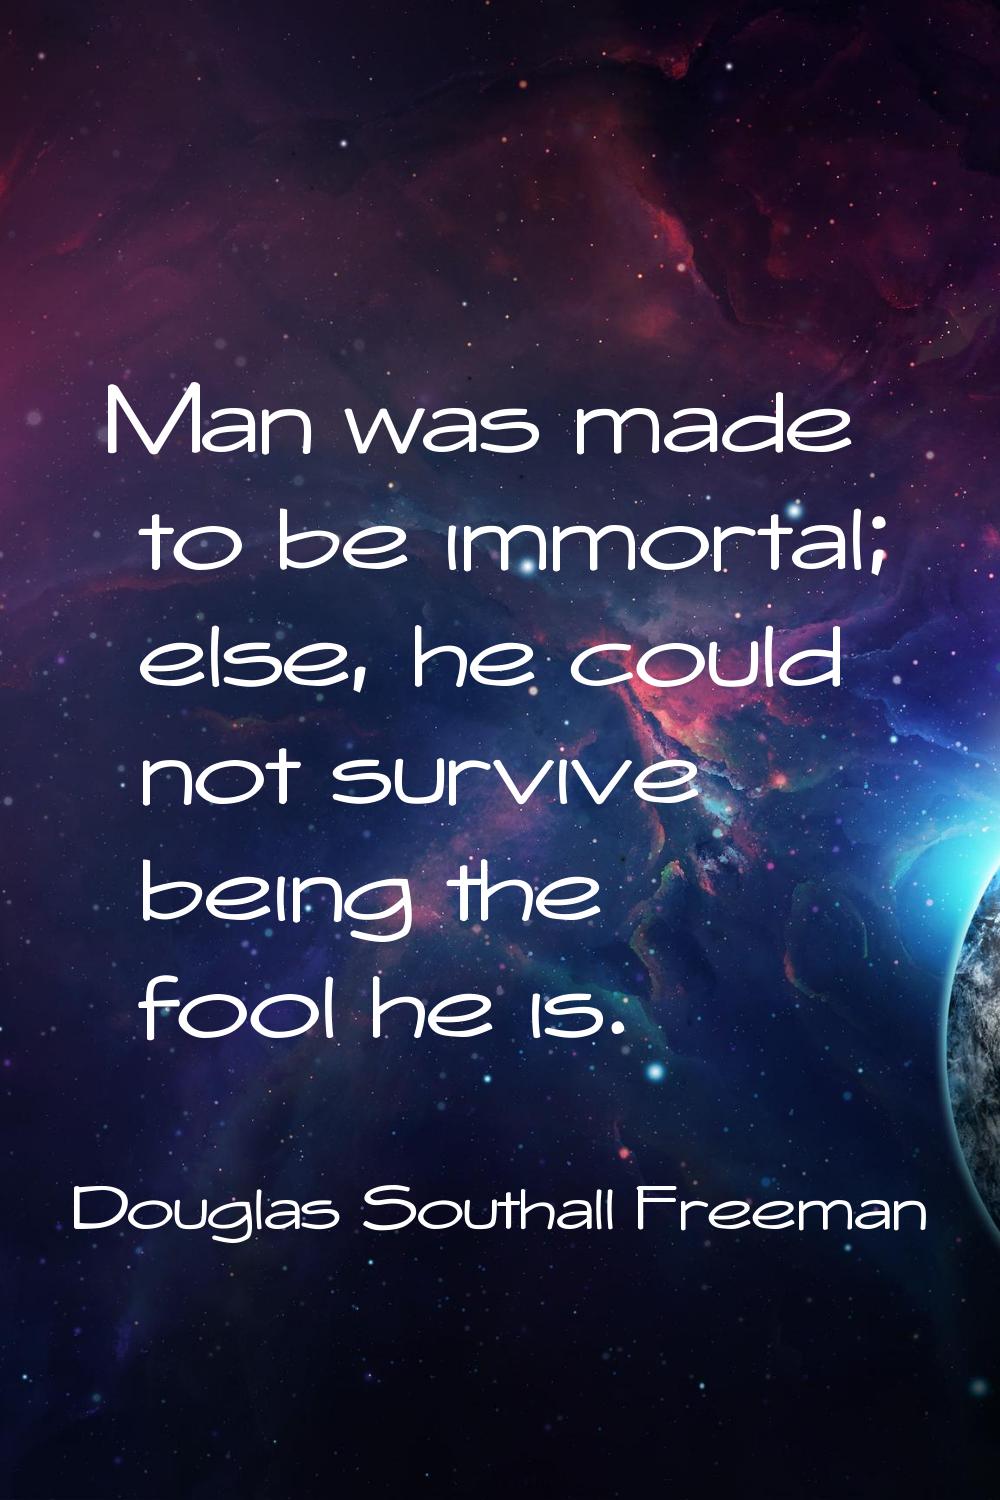 Man was made to be immortal; else, he could not survive being the fool he is.